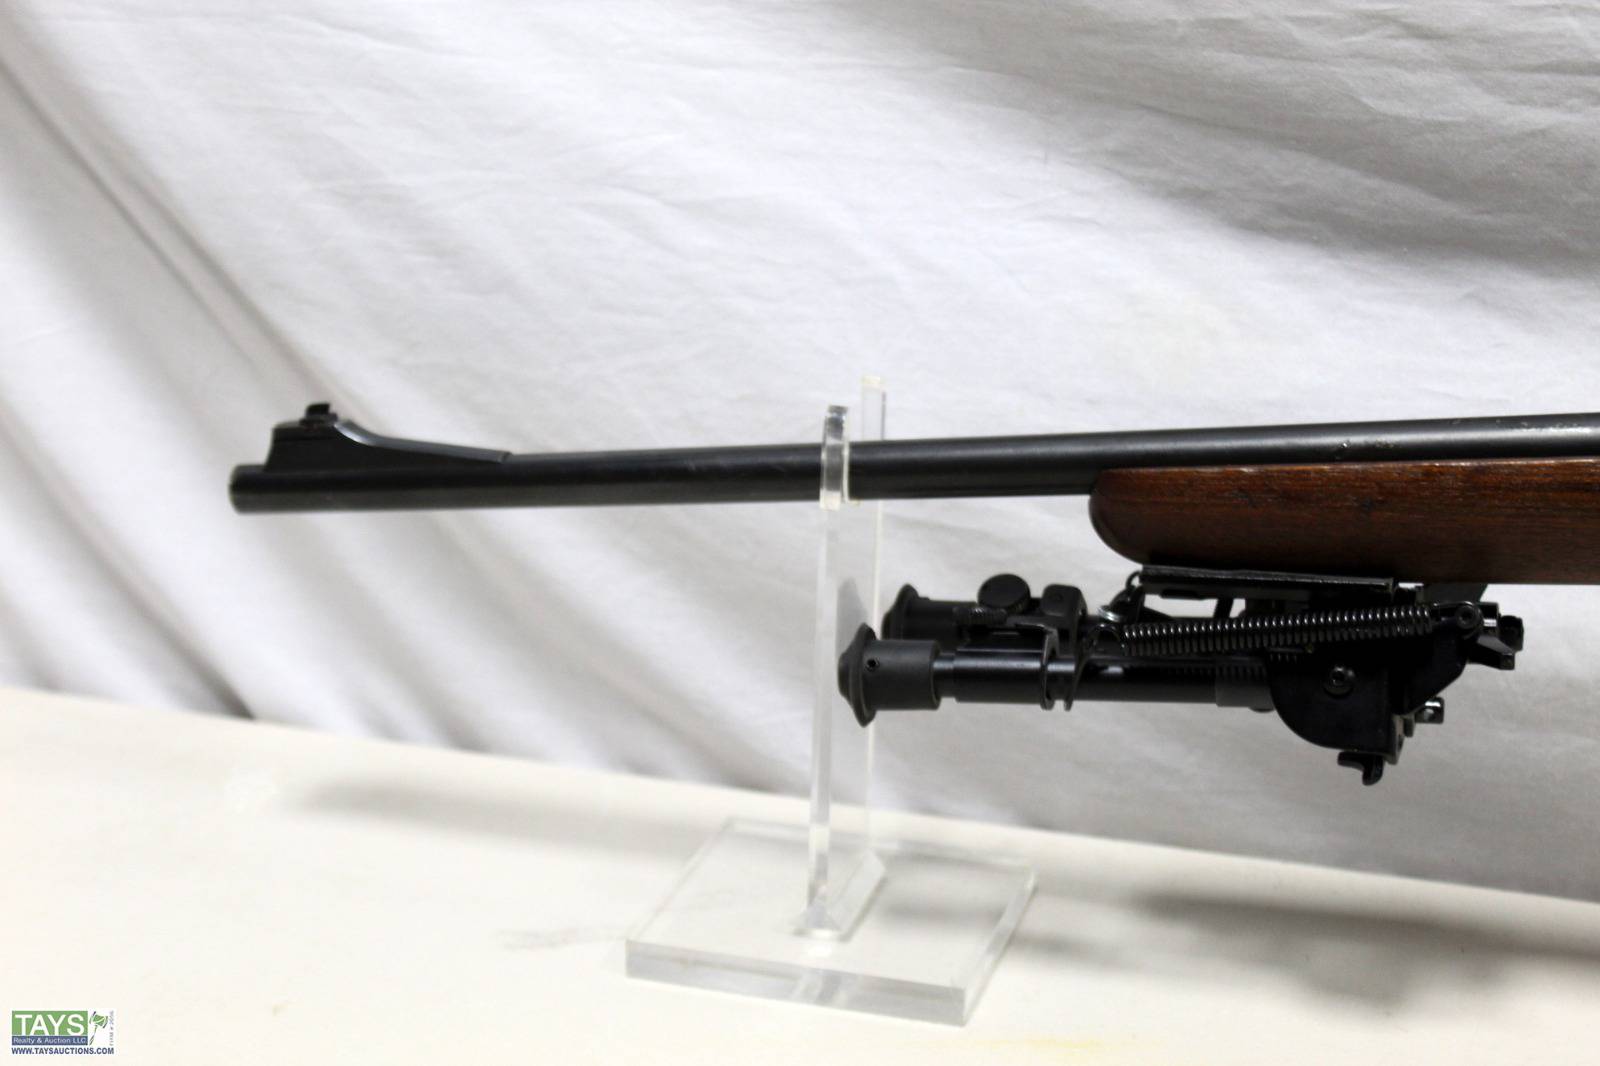 Tays Realty & Auction - Auction: ONLINE ABSOLUTE AUCTION: FIREARMS - AMMO -  KNIVES ITEM: British Enfield Long Branch MK I 303